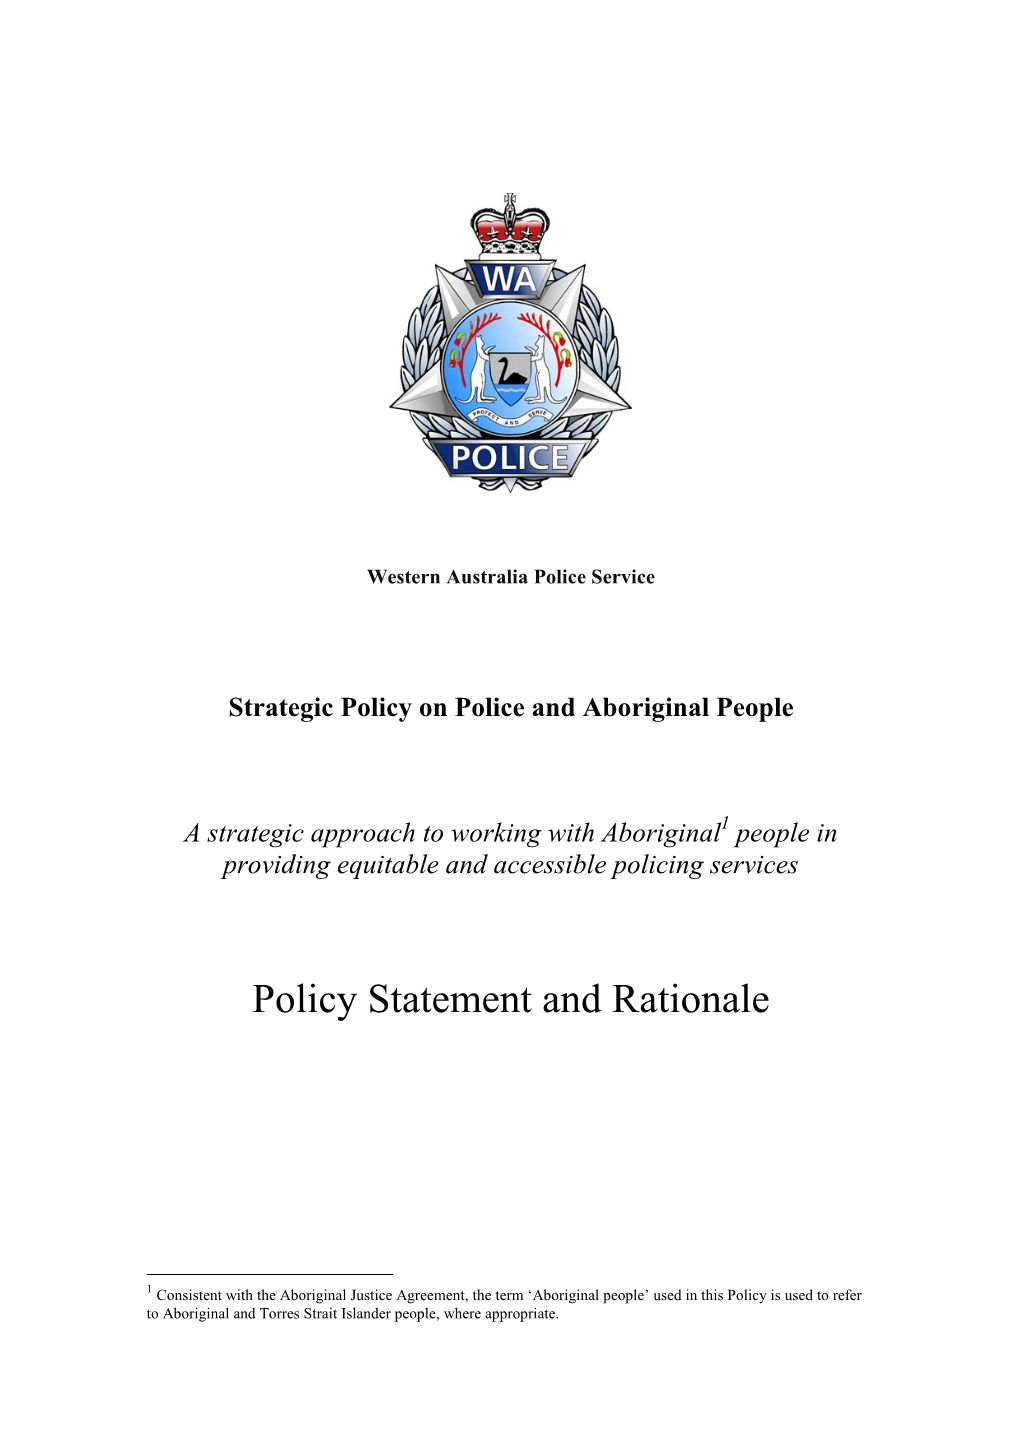 WA Police Strategic Policy on Police and Aboriginal People